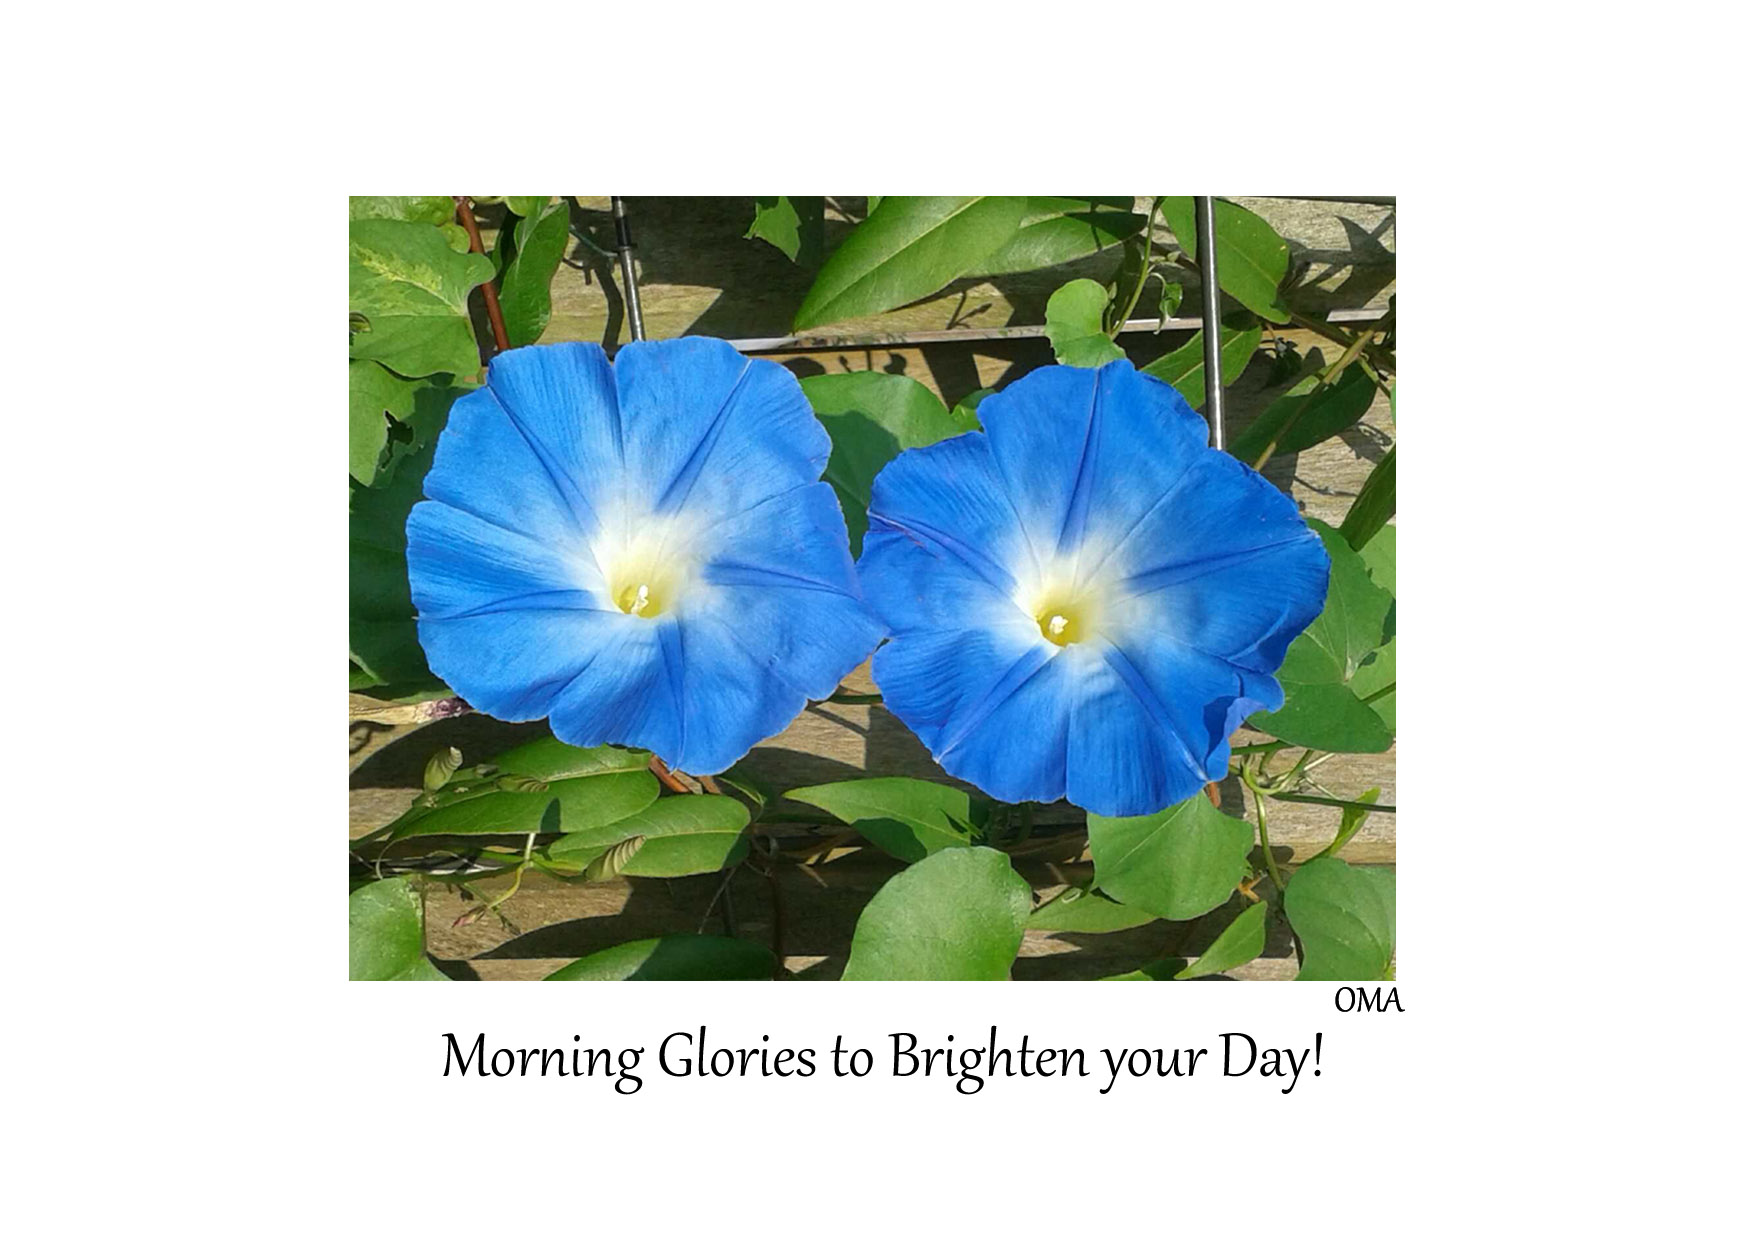 Morning Glories to Brighten Your Day